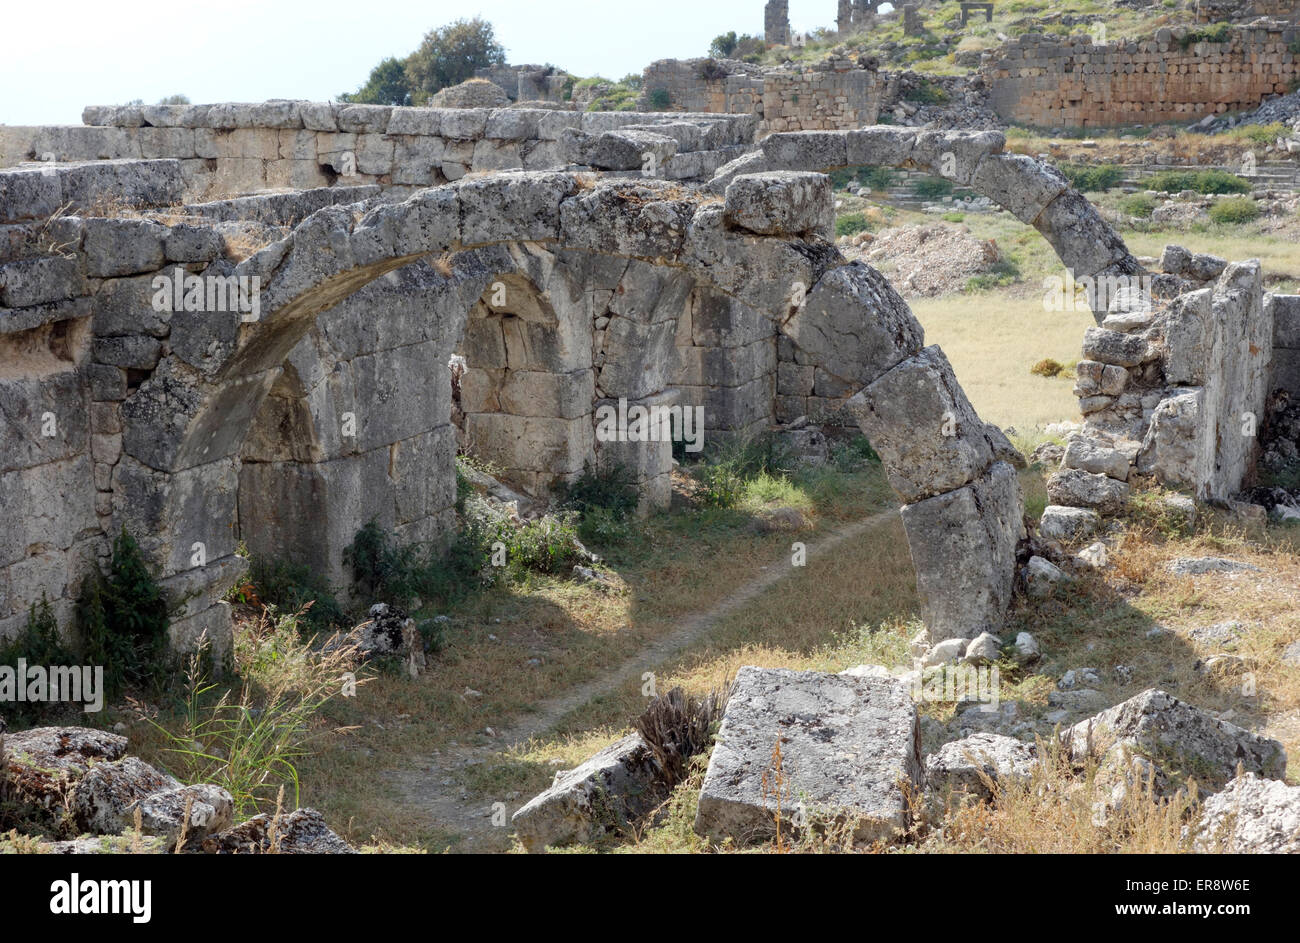 The remains of the Roman market at the ancient city of Tlos, Turkey Stock Photo